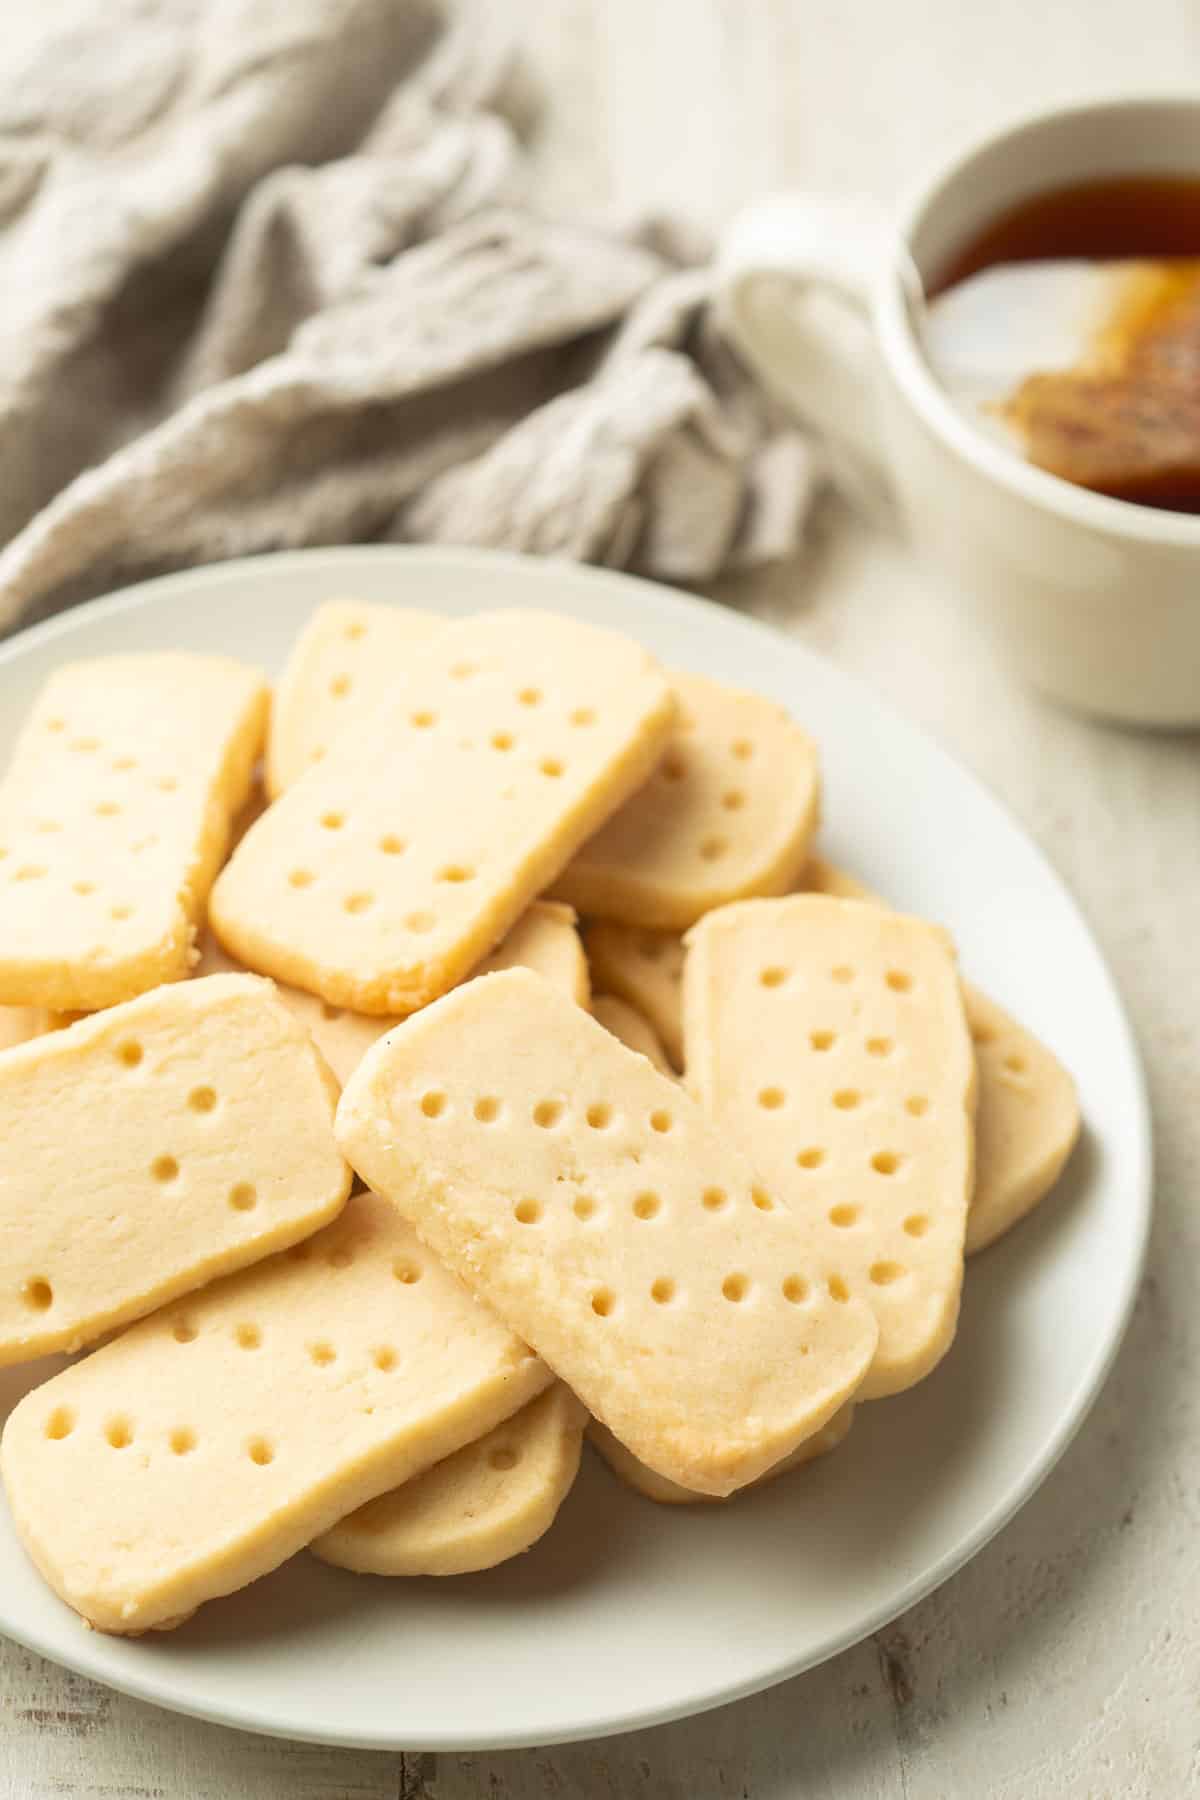 Plate of Vegan Shortbread Cookies with a cup of tea in the background.